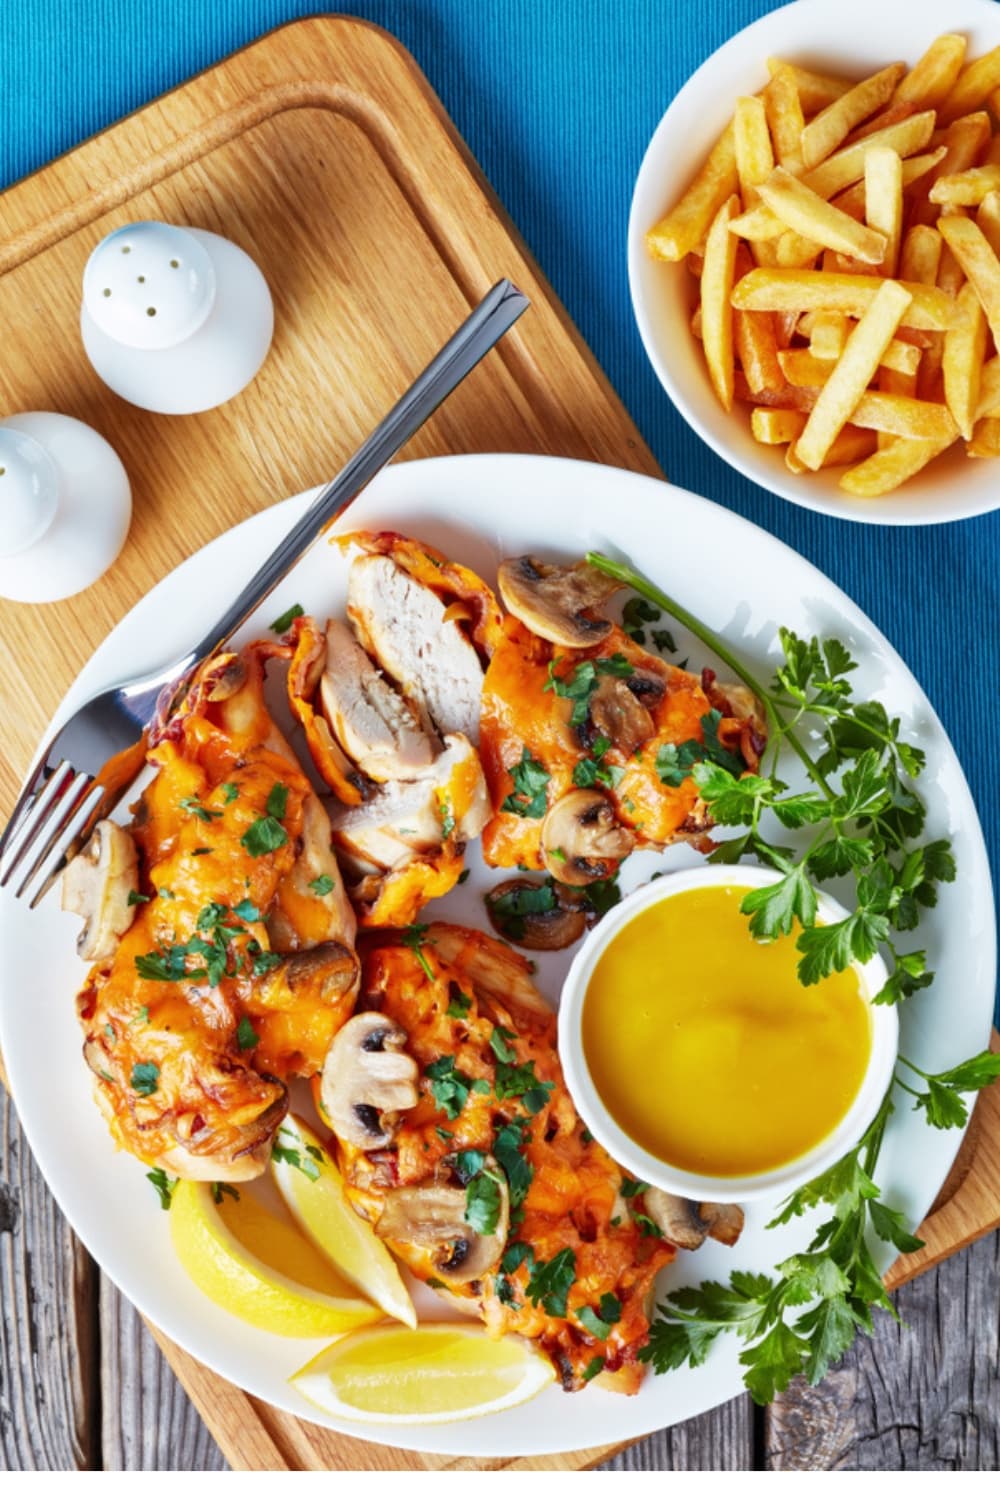 Baked chicken breast with honey mustard sauce, bacon and mushroom toppings served with sauce garnished with parsley leaves and a serving of fries on the side.